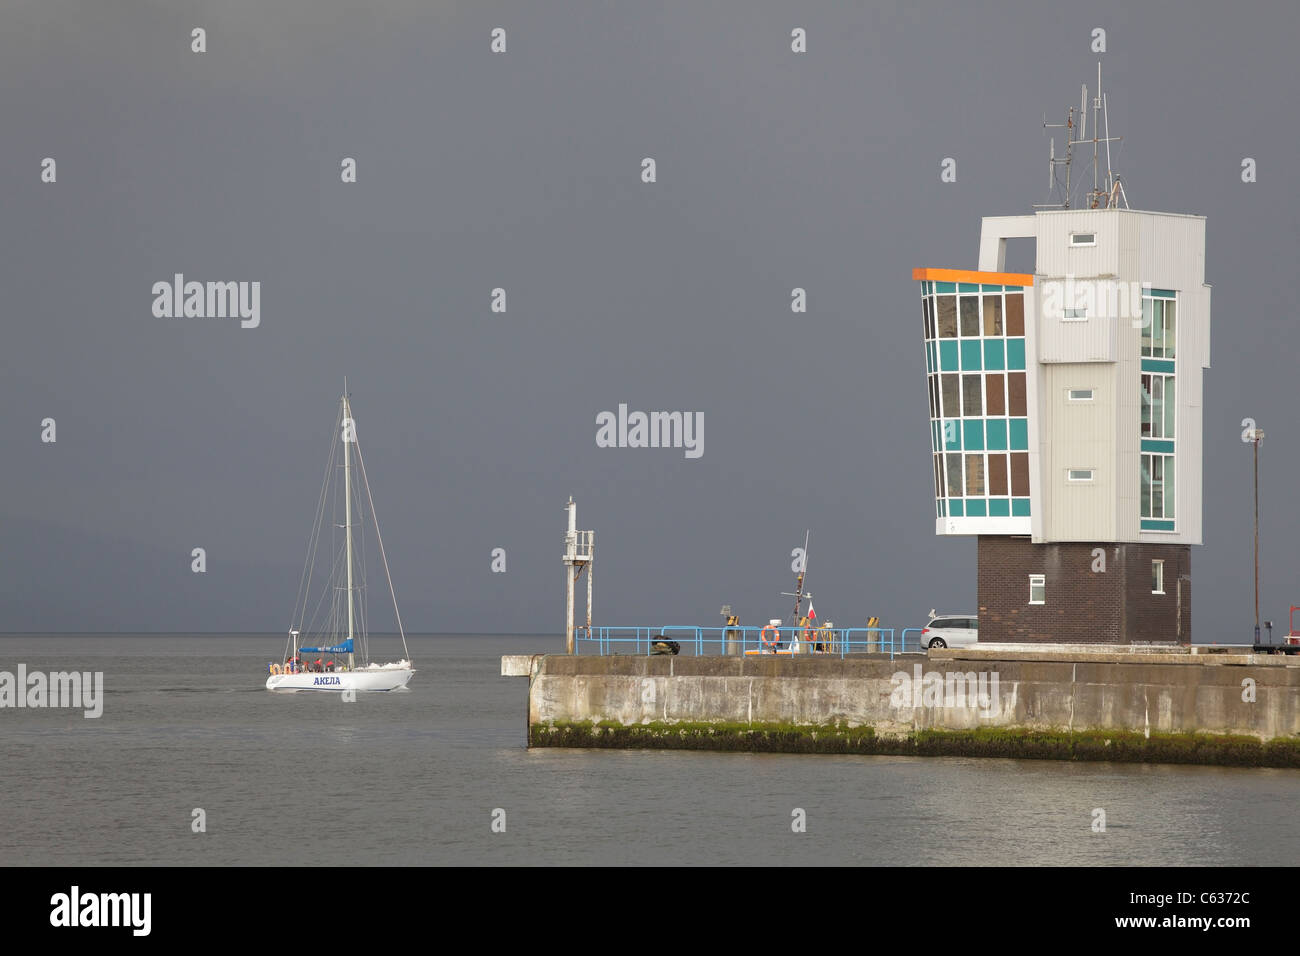 Yacht sailing past the Clydeport Control Tower at Greenock Ocean Terminal on the River Clyde, Inverclyde, Scotland, UK Stock Photo